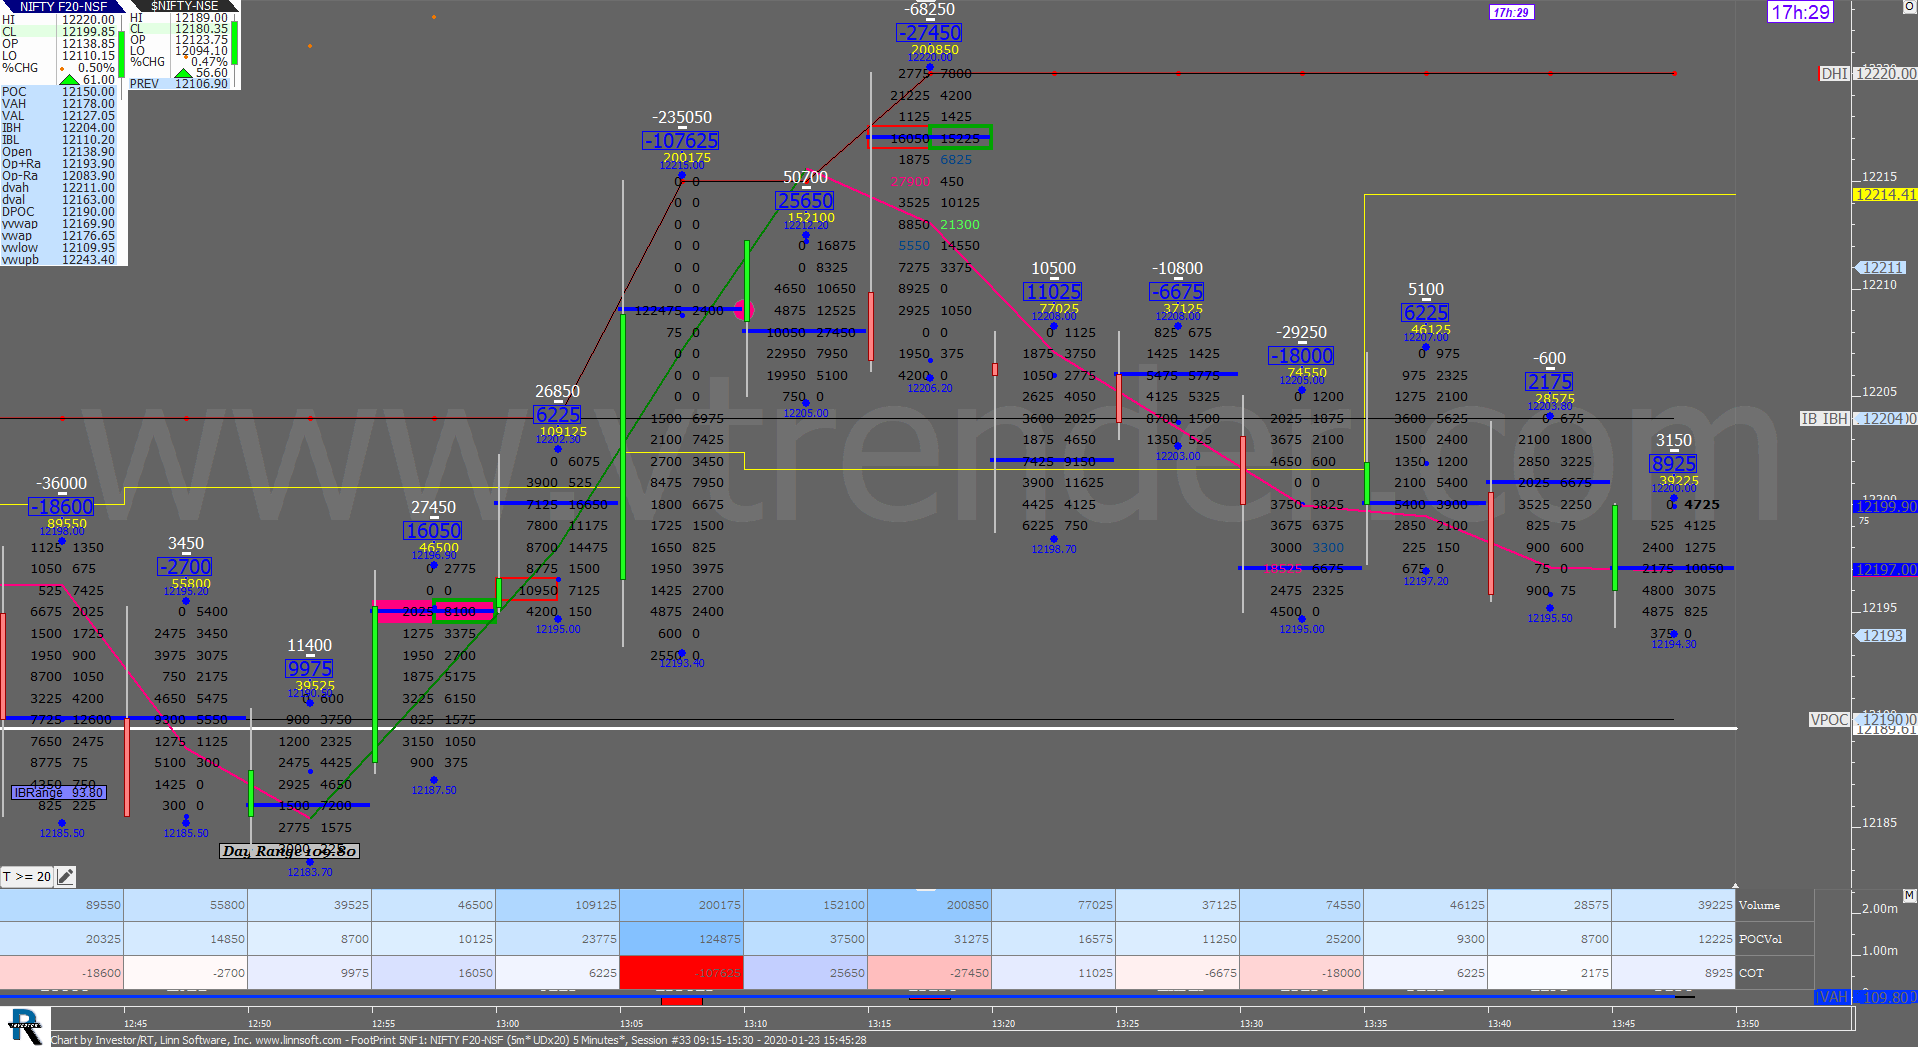 4 30 Order Flow Charts Dated 23Rd Jan 2020 (5 Mins) Banknifty Futures, Day Trading, Intraday Trading, Intraday Trading Strategies, Nifty Futures, Order Flow Analysis, Support And Resistance, Trading Strategies, Volume Profile Trading